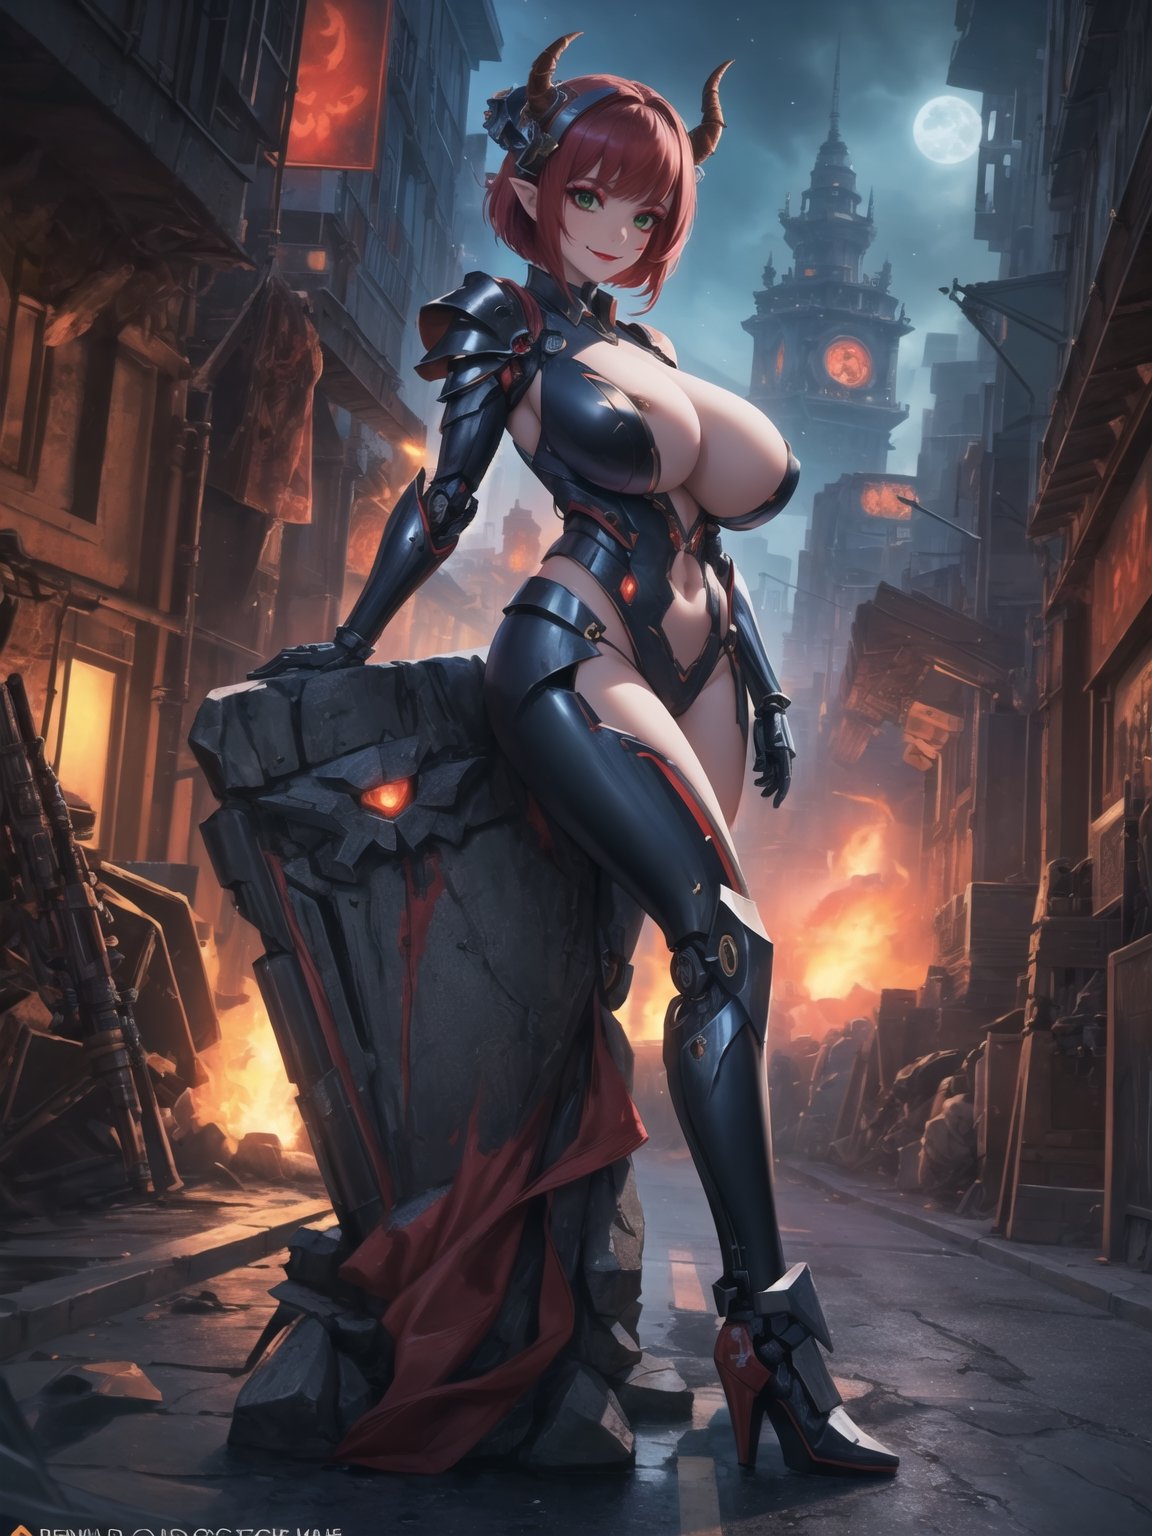 ((A demon woman)), has gigantic breasts, is wearing mecha costume+robotic armor with parts in red, totally black costume, she has ((horns, wearing helmet)), red hair, short hair, hair with bangs in front of eyes, she is Underworld at night, with many machines large stone structures, monsters, large metal structures, warcraft, 16K, UHD, best possible quality, ultra detailed, best possible resolution, ultra technological, futuristic, robotic, Unreal Engine 5, professional photography, she is, ((sensual pose with interaction and leaning on anything + object + on something + leaning against)) + perfect_thighs, perfect_legs, perfect_feet, ((full body)), more detail, better_hands